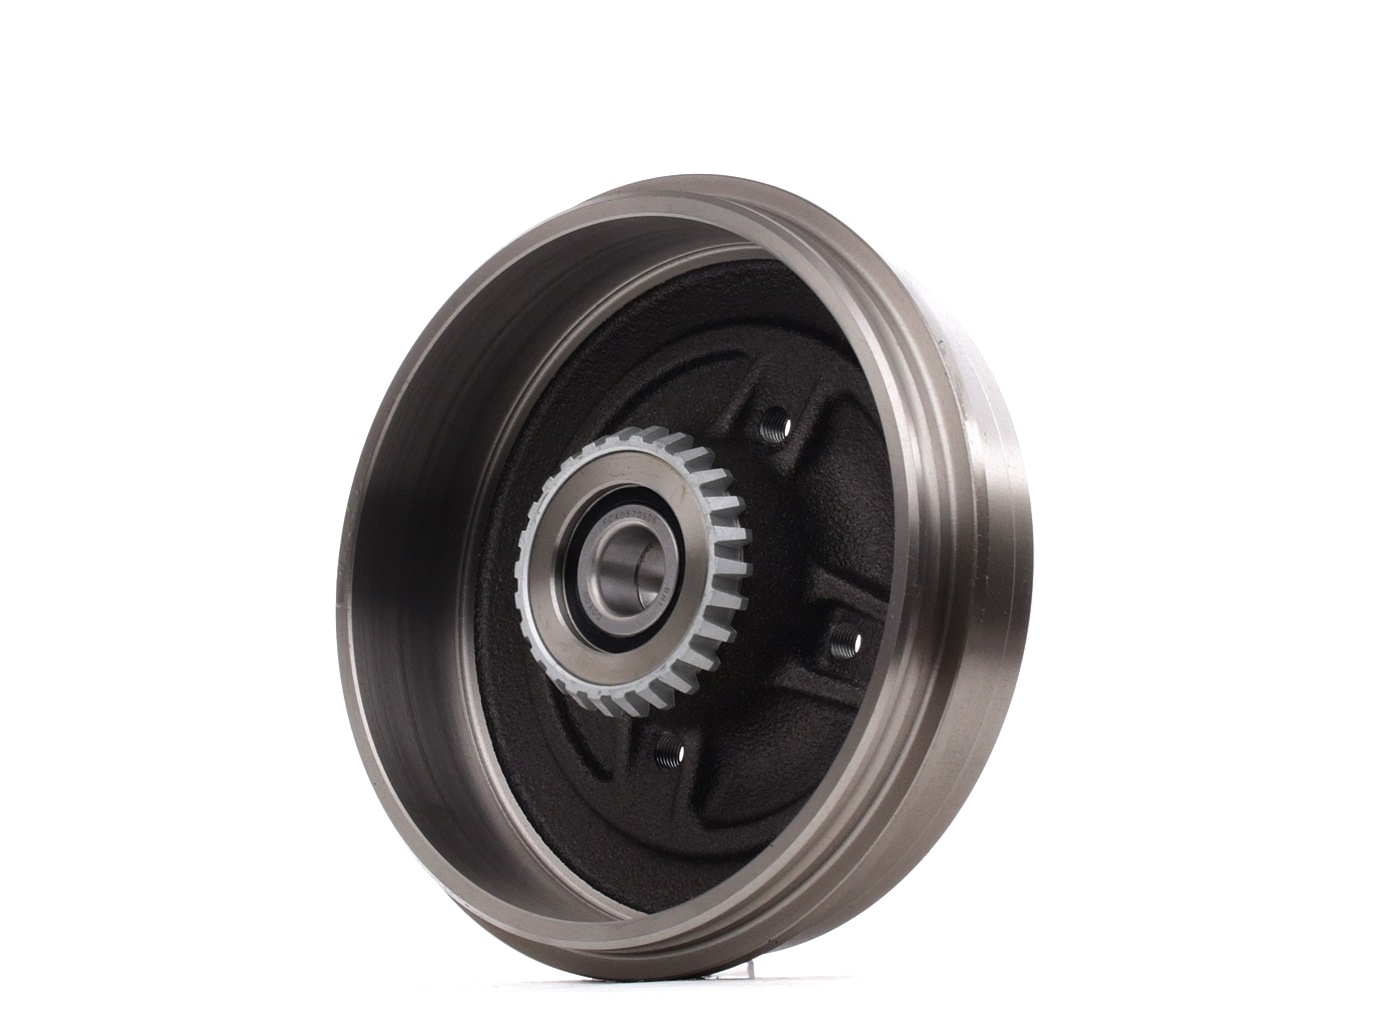 SKBDM-0800240 STARK Brake drum RENAULT with integrated wheel bearing, with ABS sensor ring, 234,0mm, Rear Axle